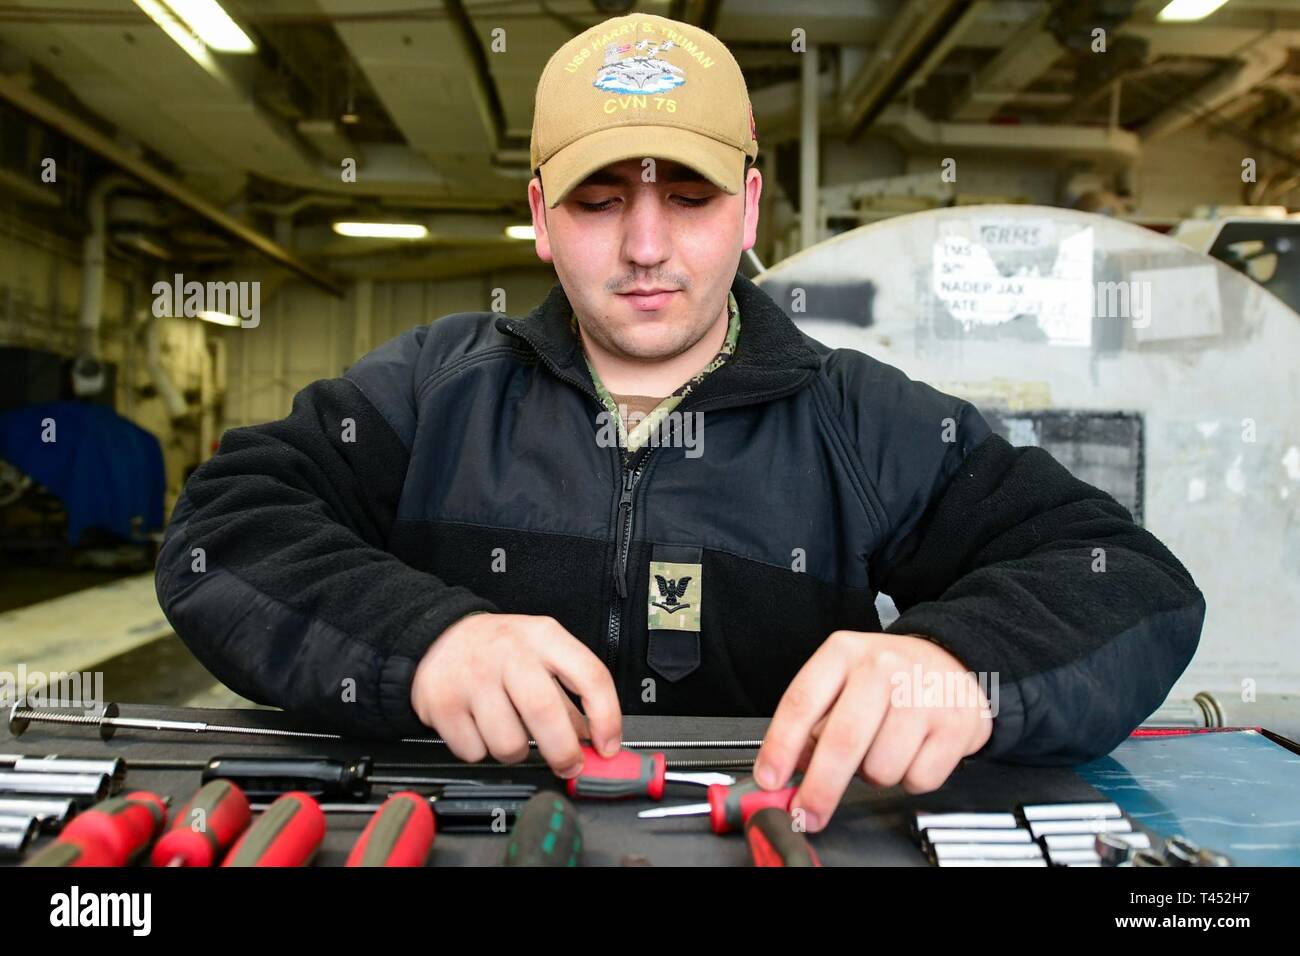 NORFOLK, Va. (Feb. 27, 2019) Aviation Machinist's Mate 3rd Class Ace Caldwell organizes tools prior to maintenance in the jet shop aboard the Nimitz-class aircraft carrier USS Harry S. Truman (CVN 75). Harry S. Truman is currently moored at Naval Station Norfolk conducting targeted maintenance and training, and remains operationally ready. Stock Photo